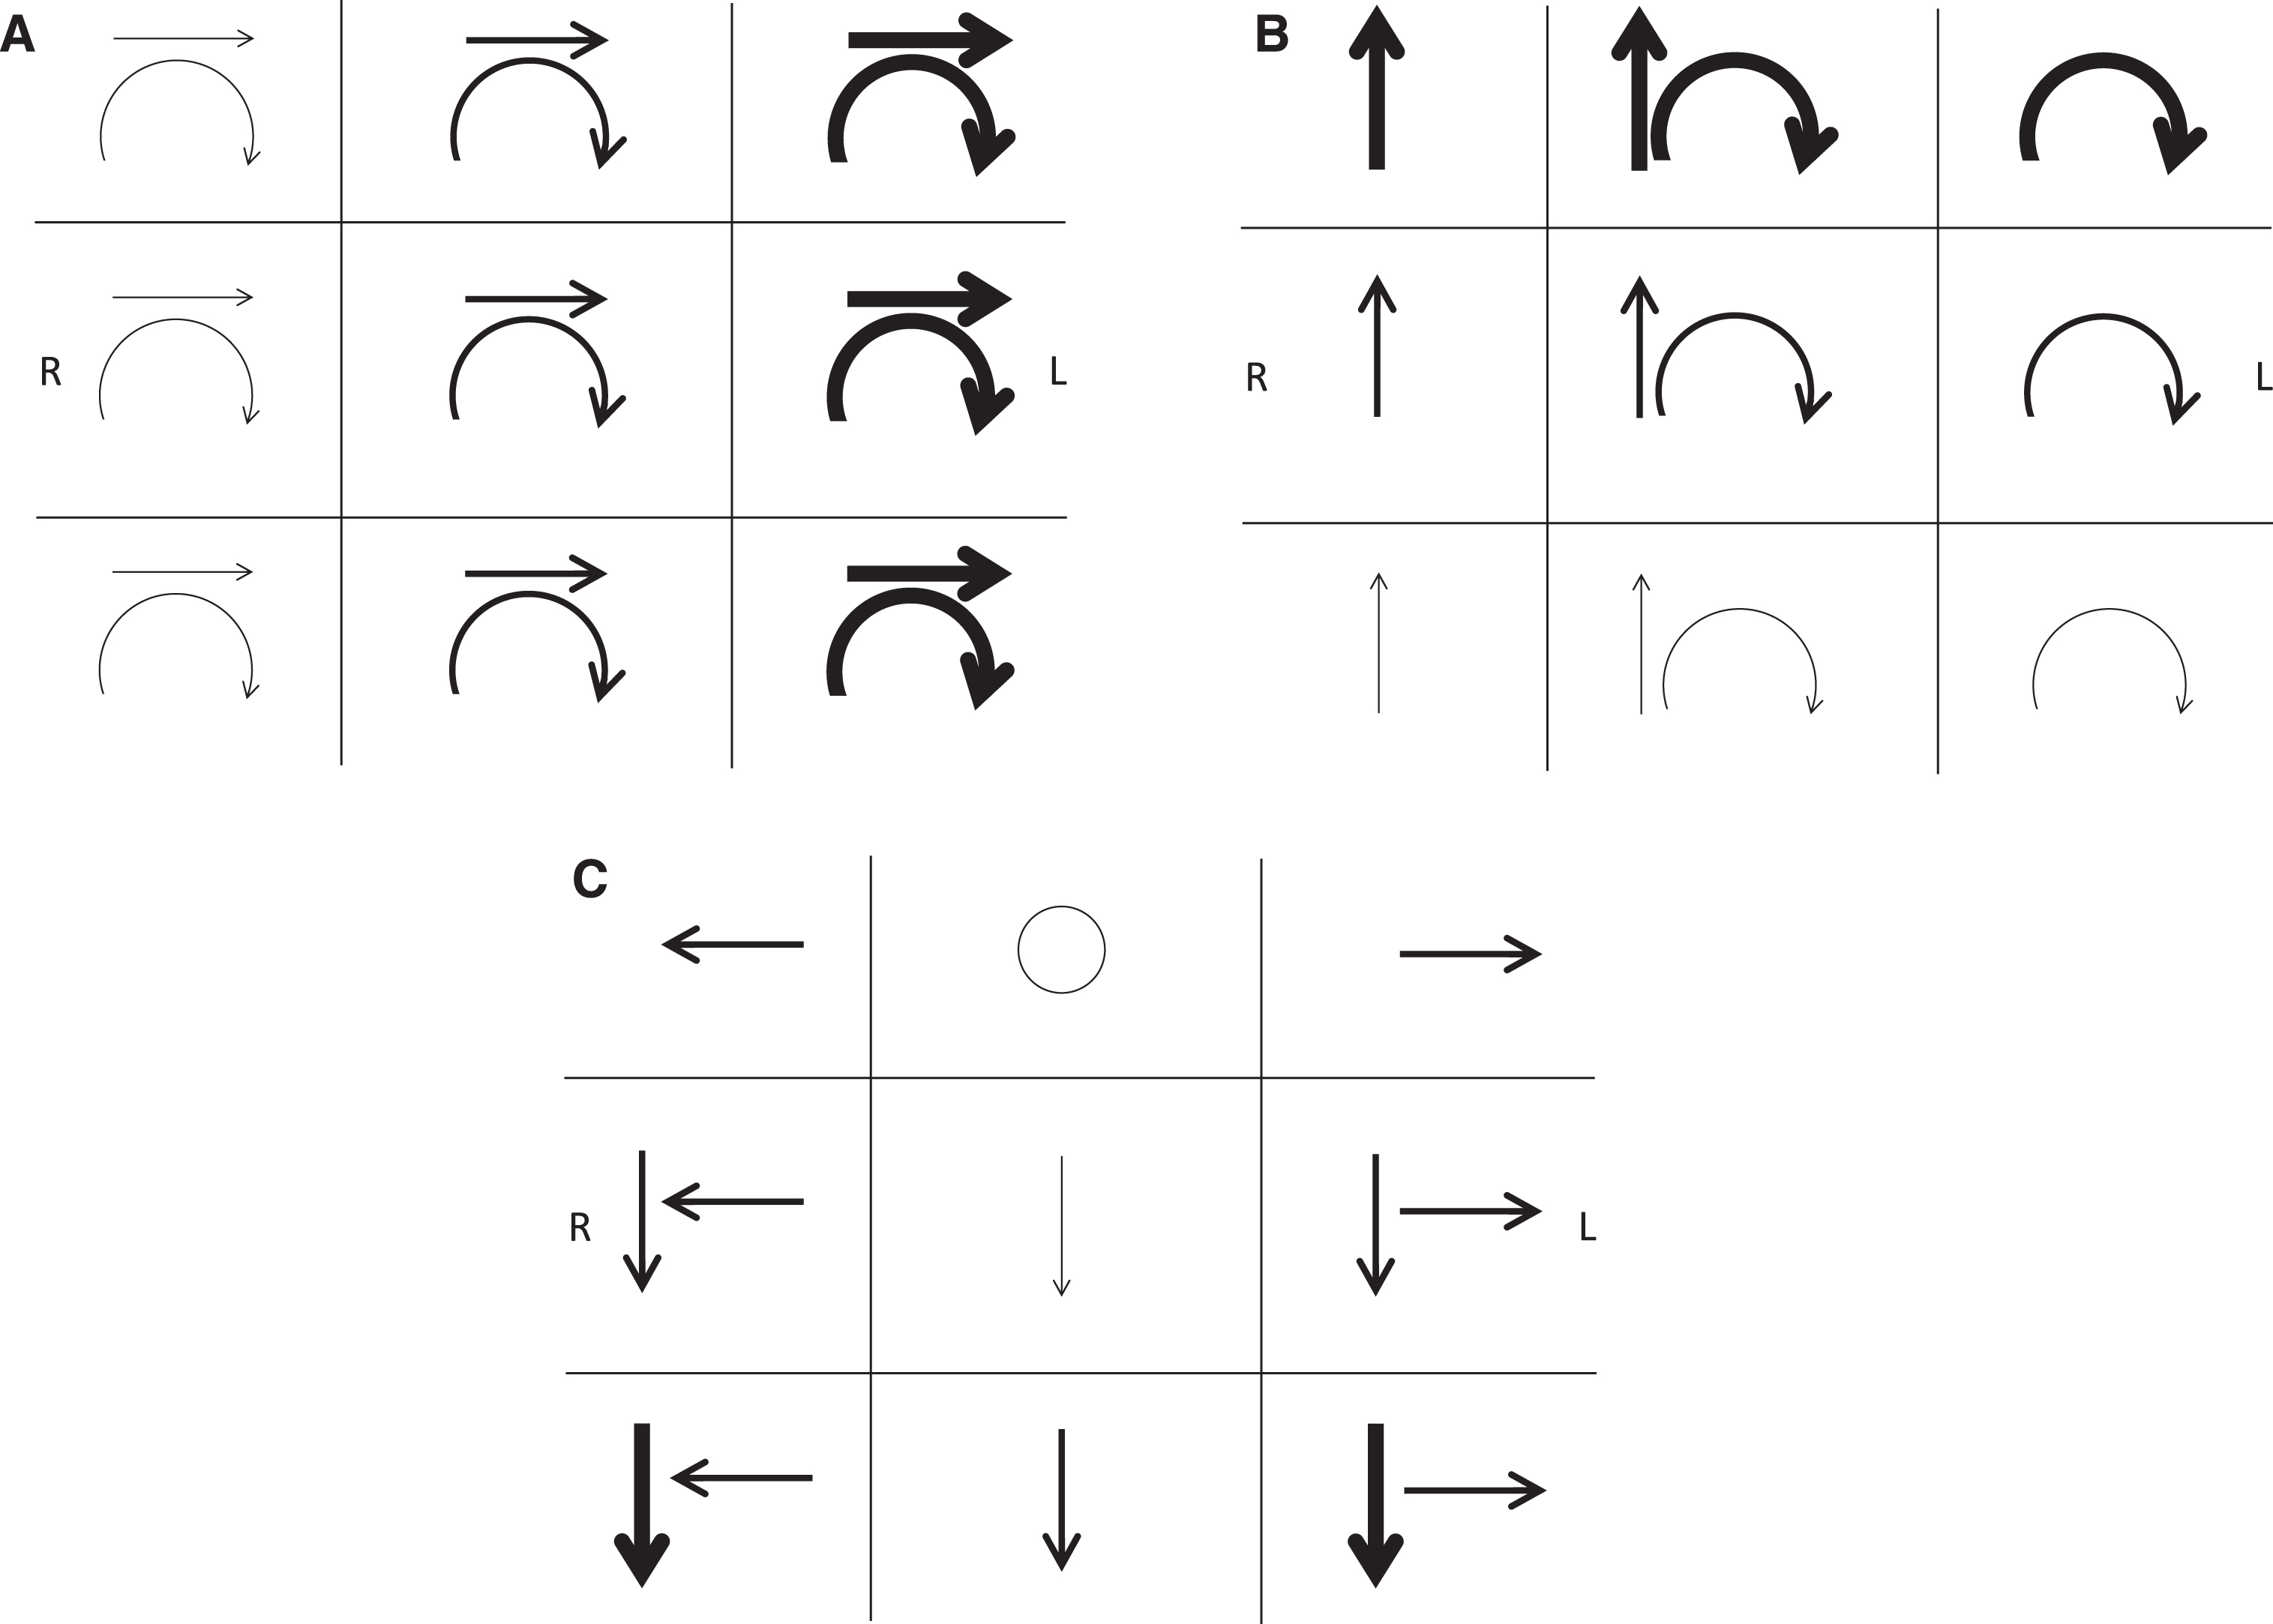 Jerk nystagmus schematic notation. Representing the important attributes of three-dimensional eye movements on a two-dimensional page presents several challenges requiring care to avoid ambiguity. As with describing nystagmus, its schematic notation should document the direction and intensity in the 9 cardinal gaze positions. If the nystagmus is not conjugate, each eye’s characteristics can be documented separately. By convention, eye movements are drawn from the vantage point of the examiner in front of the patient. Text should indicate whether arrows represent the slow or fast phase direction. In A-C, the arrows denote the direction of the fast phases, with the boldness of the arrows reflecting the intensity of the nystagmus. The frame of reference must be specified in every schematic in order to clarify whether the arrows for a given gaze position refer to eye movements being described in head-fixed coordinates (as viewed face to face with the patient) or eye-fixed coordinates (as viewed along the patient’s visual axis). The frame of reference that most efficiently describes a given pathologic nystagmus is typically the one most closely linked to the mechanism or site causing the nystagmus. Examples are shown: (A) Spontaneous third-degree horizontal-torsional left-beating peripheral vestibular nystagmus. This mixed horizontal-torsional nystagmus in straight-ahead gaze that obeys Alexander’s law (increases when looking in the fast phase direction and decreases when looking in the slow phase direction) is typical for an uncompensated right unilateral vestibular lesion. In this case the nystagmus directional arrows are in head-referenced coordinates, reflecting the combined effect of injury to all three semicircular canals and producing nystagmus that remains in a fixed direction with respect to the head and labyrinths regardless of gaze position (see Fig. 3). (B) Left posterior semicircular canal benign paroxysmal positional nystagmus. Nystagmus elicited in the left Dix-Hallpike position consists of mixed upbeat and torsional nystagmus with the upper pole of the eyes beating toward the left ear in straight-ahead gaze. Since the nystagmus direction is fixed in the plane of the left posterior canal, it appears predominantly vertical in rightward gaze and predominantly torsional in leftward gaze when observed along the patient’s visual axis (as documented in each box representing eye-referenced coordinates in this schematic), as well as obeying Alexander’s law. Note that the torsional fast phases could be confusingly described as clockwise from the examiner’s perspective (incorrect, but commonly used) but counterclockwise from the patient’s perspective (correct, but inconsistently used). (C) Spontaneous downbeat and bilateral gaze-holding nystagmus. Low-intensity pure downbeat nystagmus in straight-ahead gaze increases in lateral and downgaze and is associated with pathologic bilateral gaze-holding nystagmus. This schematic uses head-referenced coordinates, indicating that the downbeat component appears to remain fixed to labyrinthine coordinates regardless of gaze position. This may imply that the downbeat nystagmus is coming from a vestibular tone imbalance of the vertical rotational vestibulo-ocular reflex.